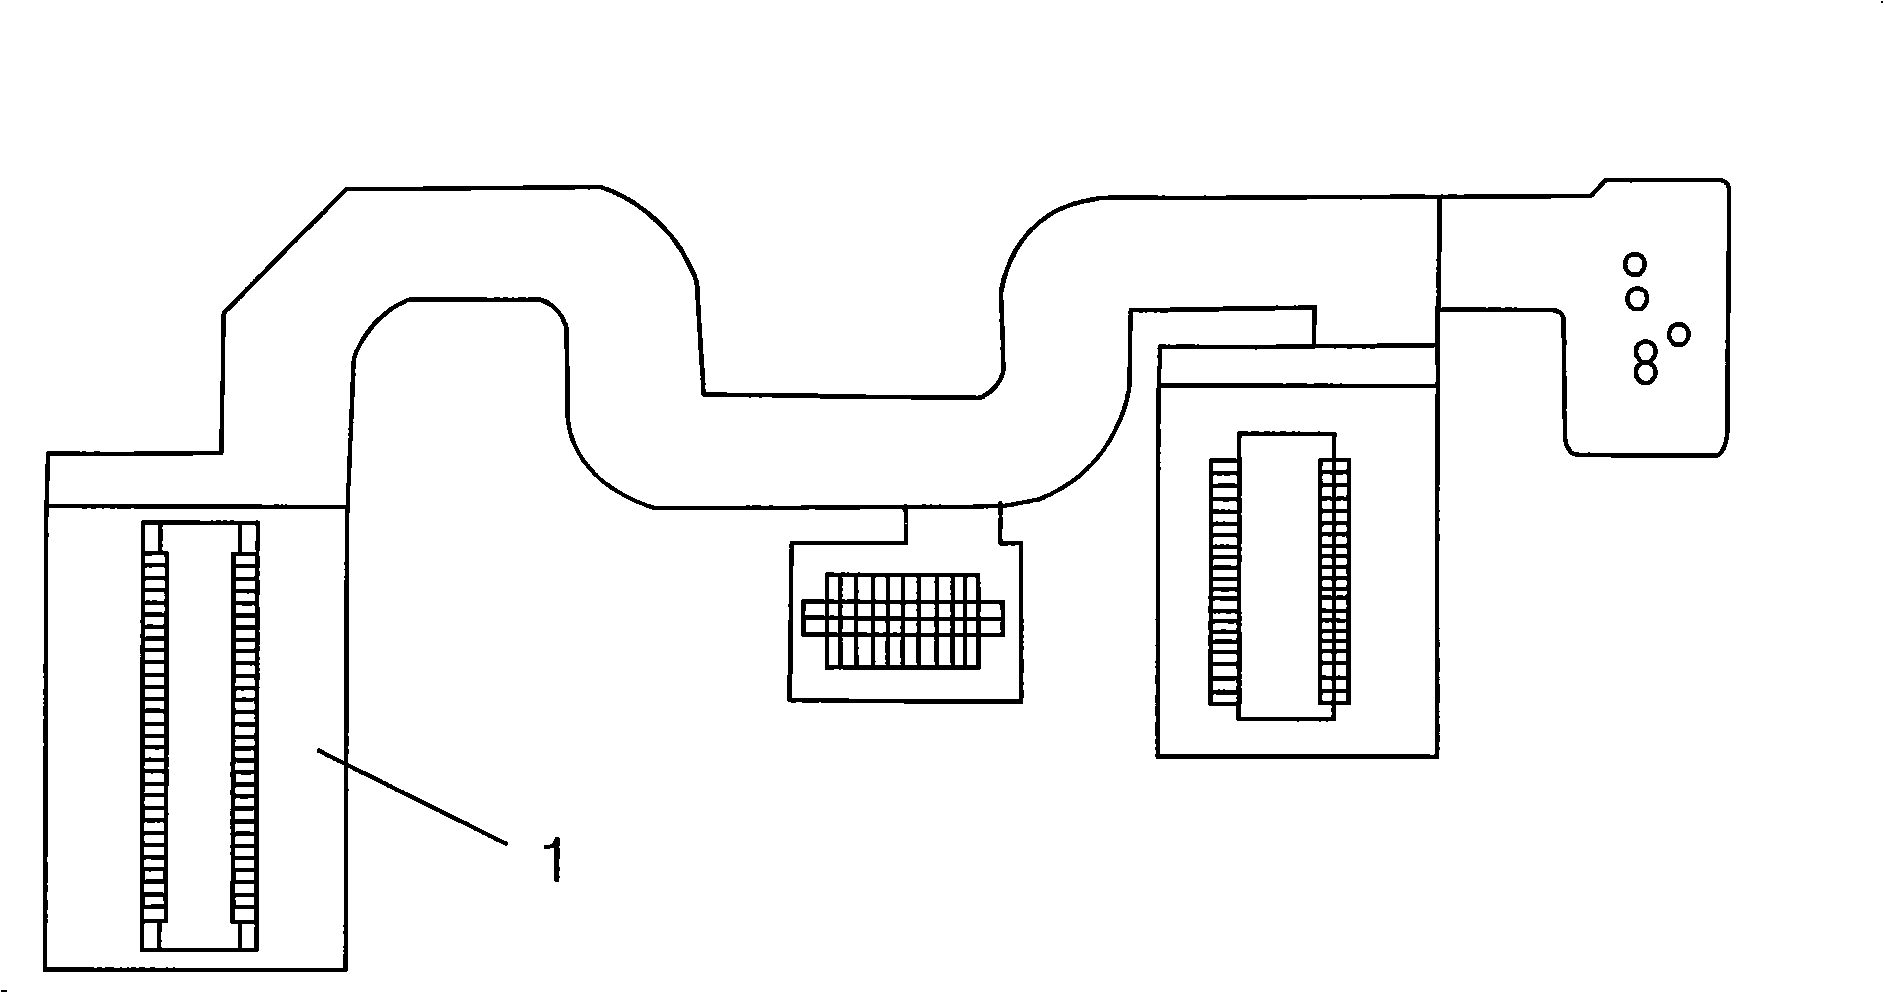 Shielding and earthing structure of flexible circuit board